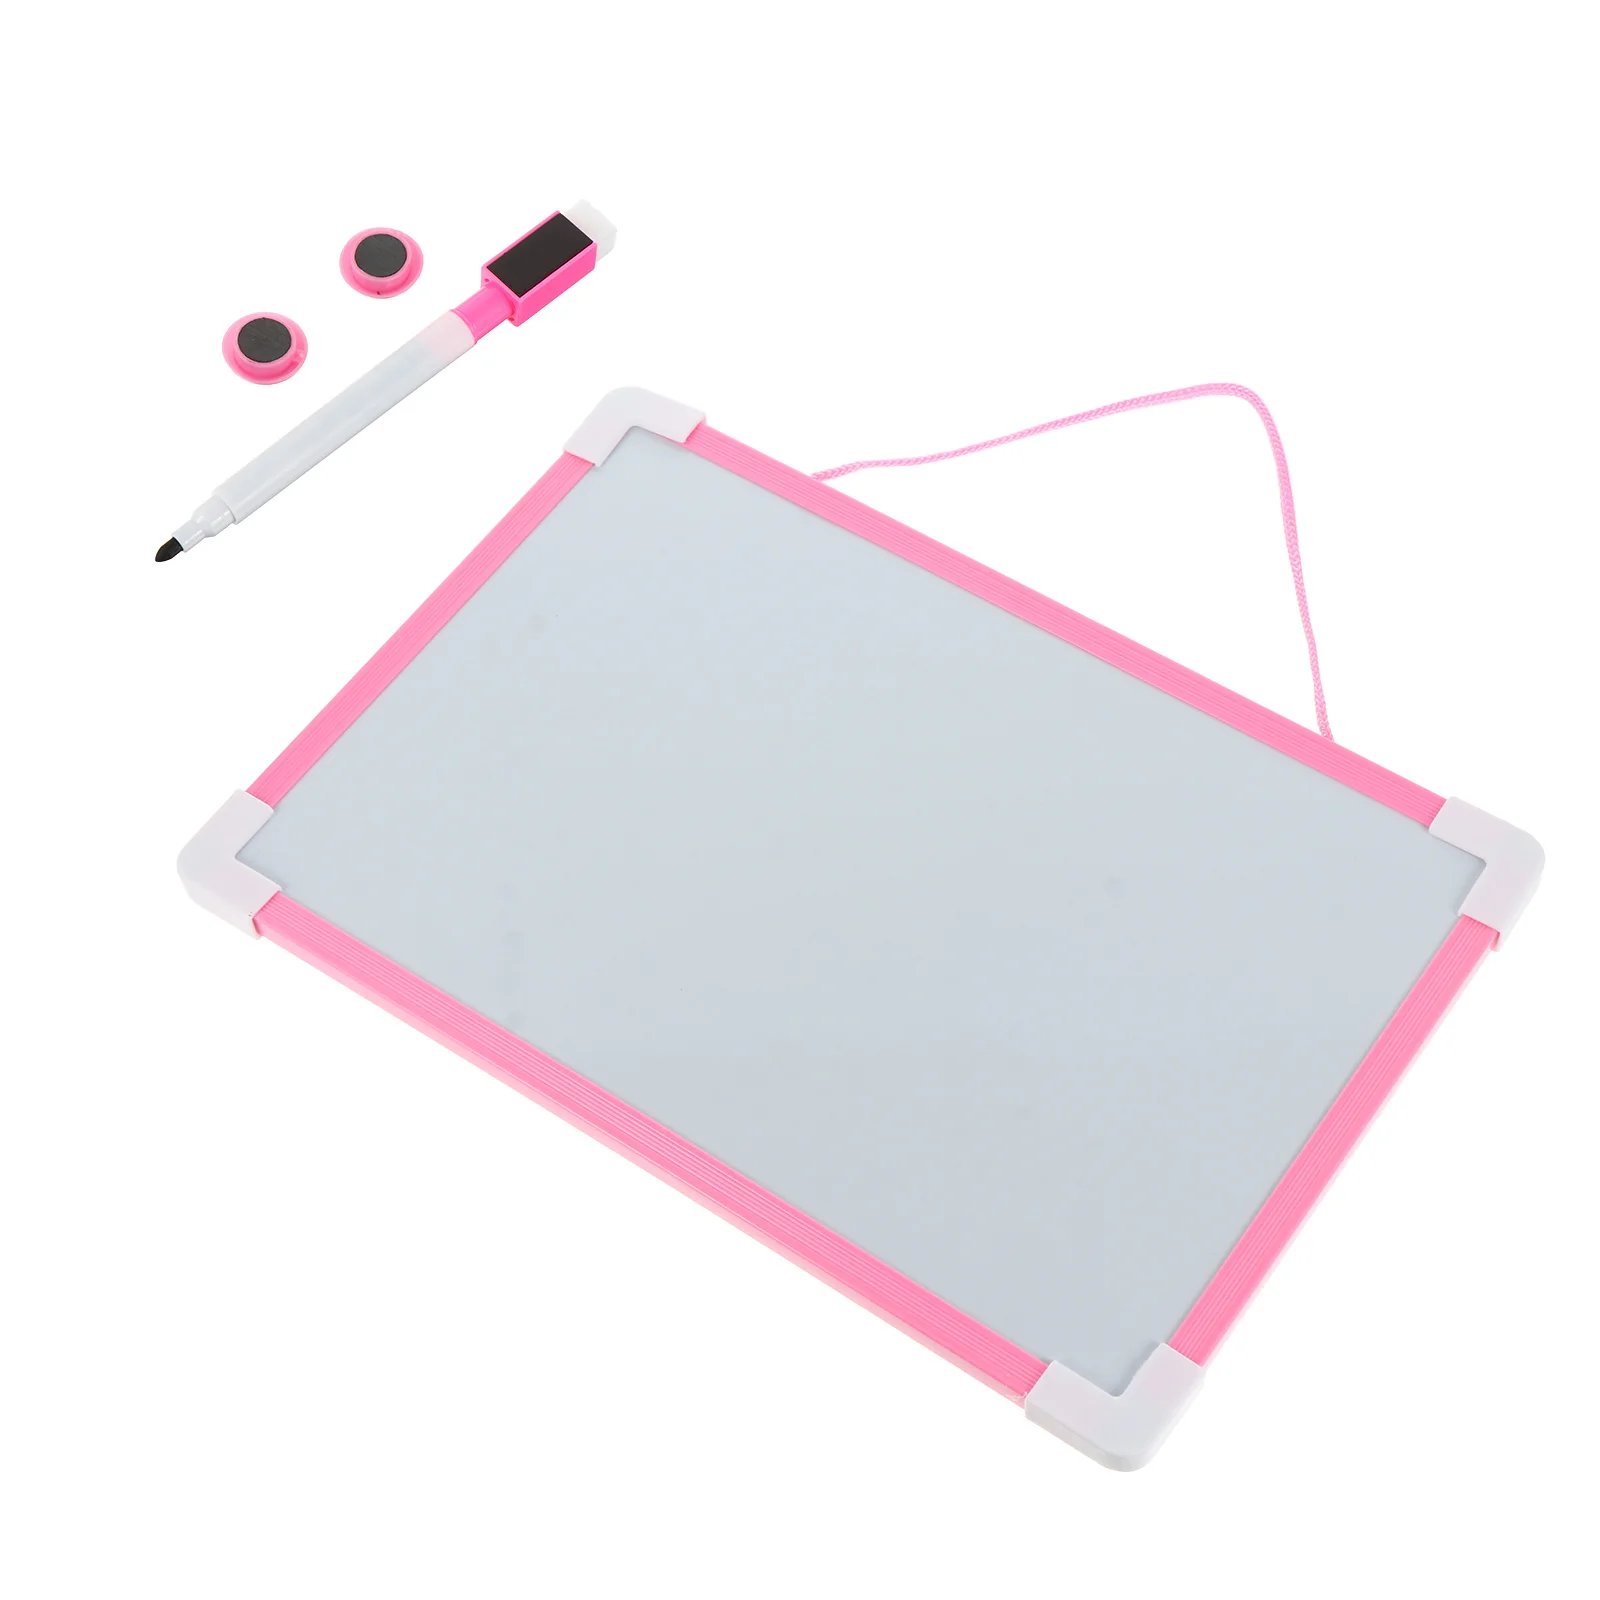 

Magnetic Dry Erase Board Double Sided Graffiti Writing Board Whiteboard Message Board Hanging Pen and 2 Magnetic Snaps Erasable